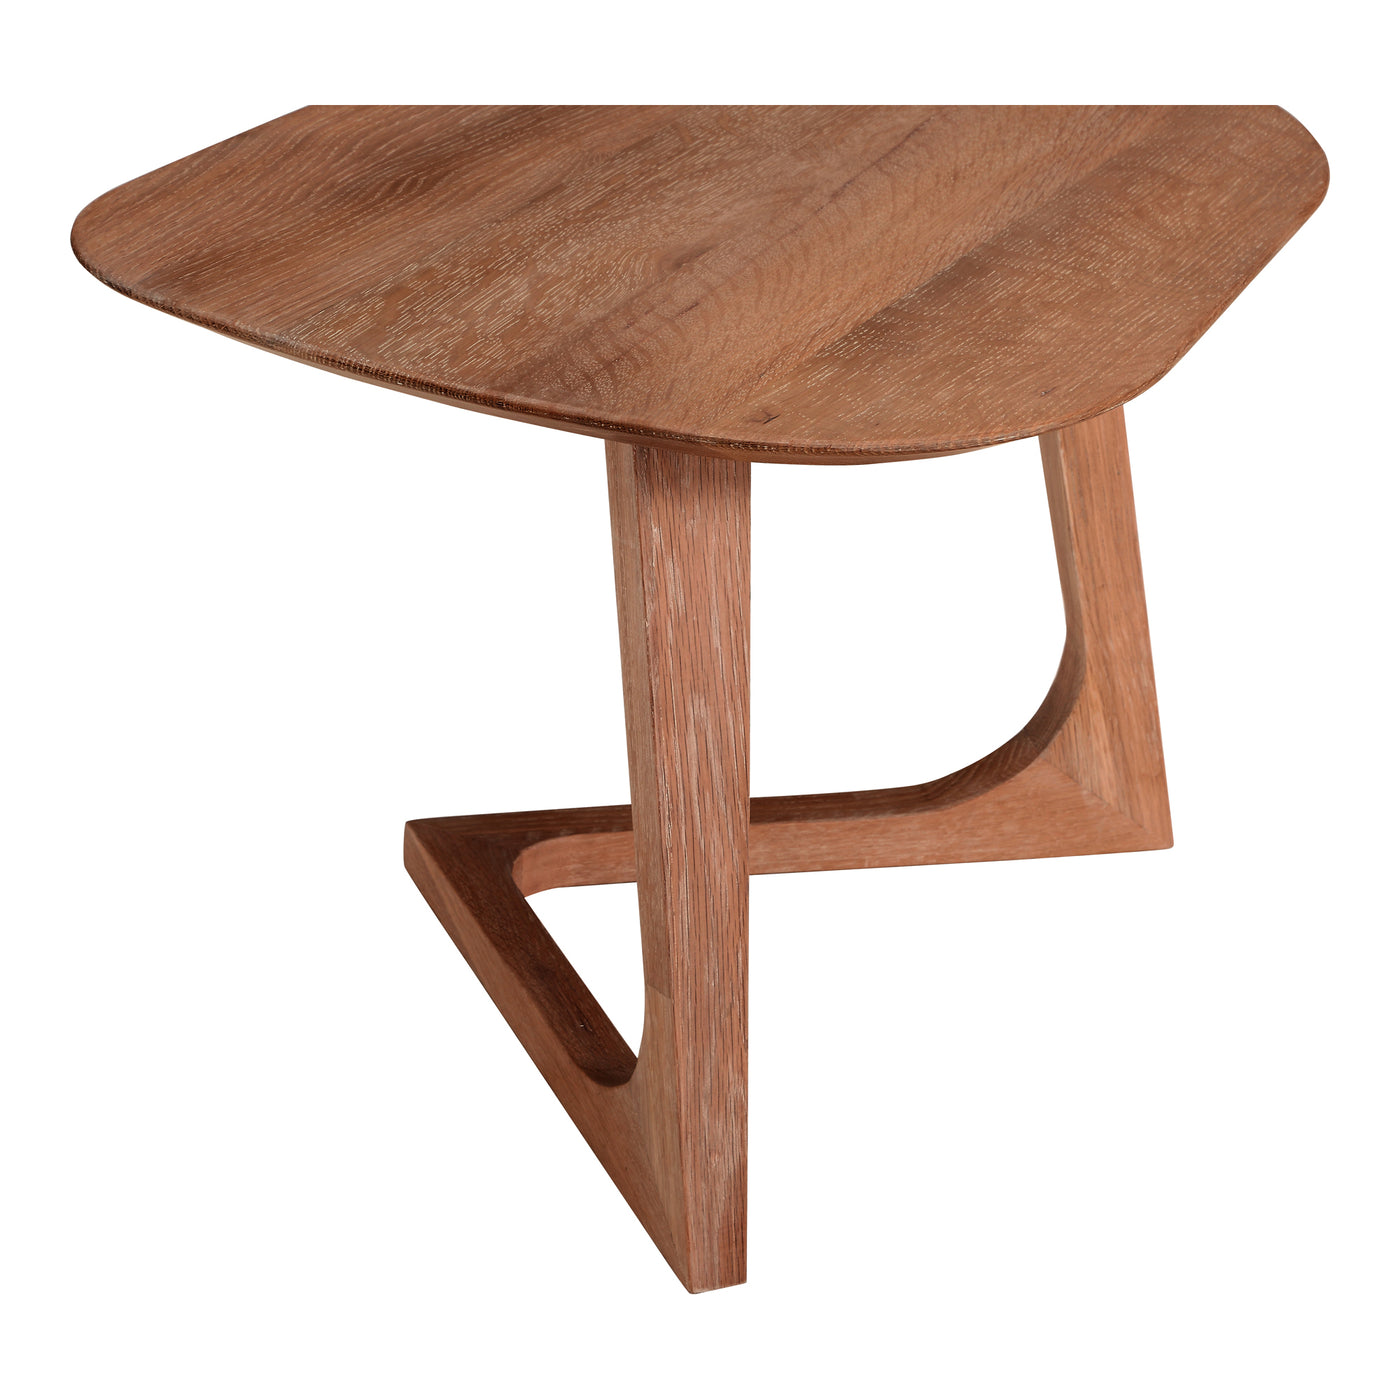 The Godenza end table is the cherry on top on a midcentury modern space. The solid walnut wood provides durability and wil...